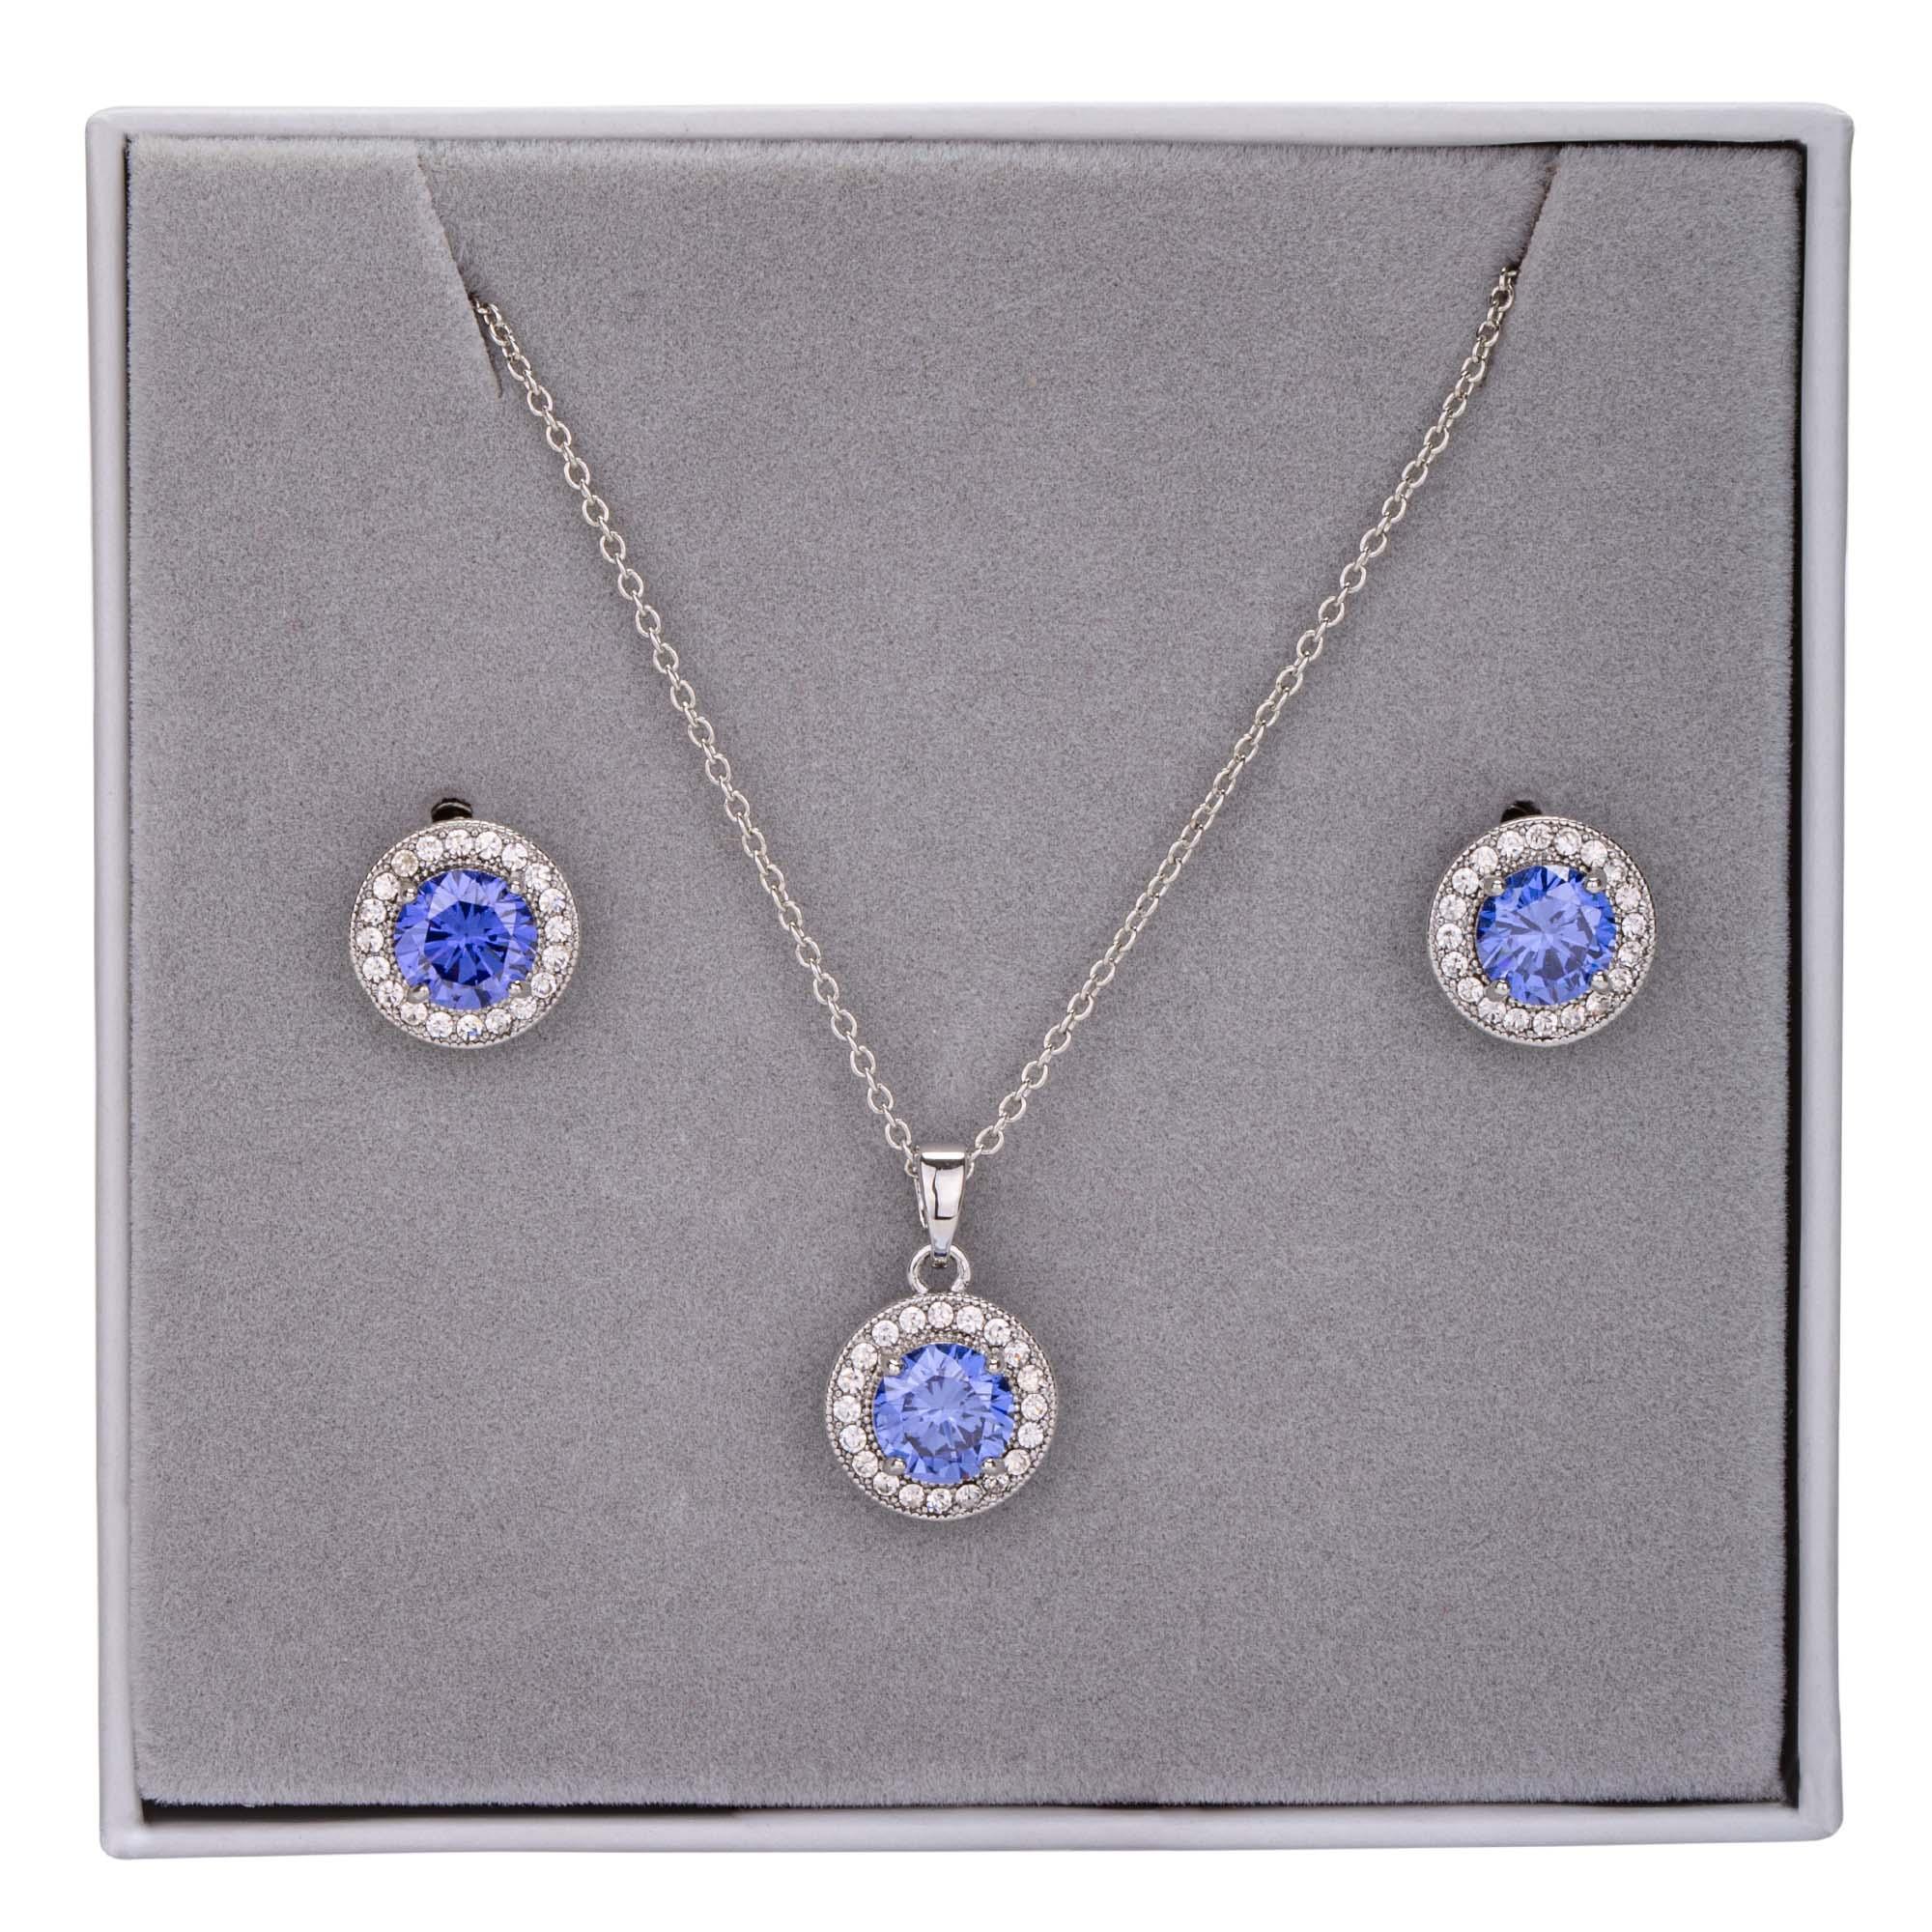 Cubic Zirconia Circle Pendant Necklace & Earrings Boxed Set in Blue - D&X Retail